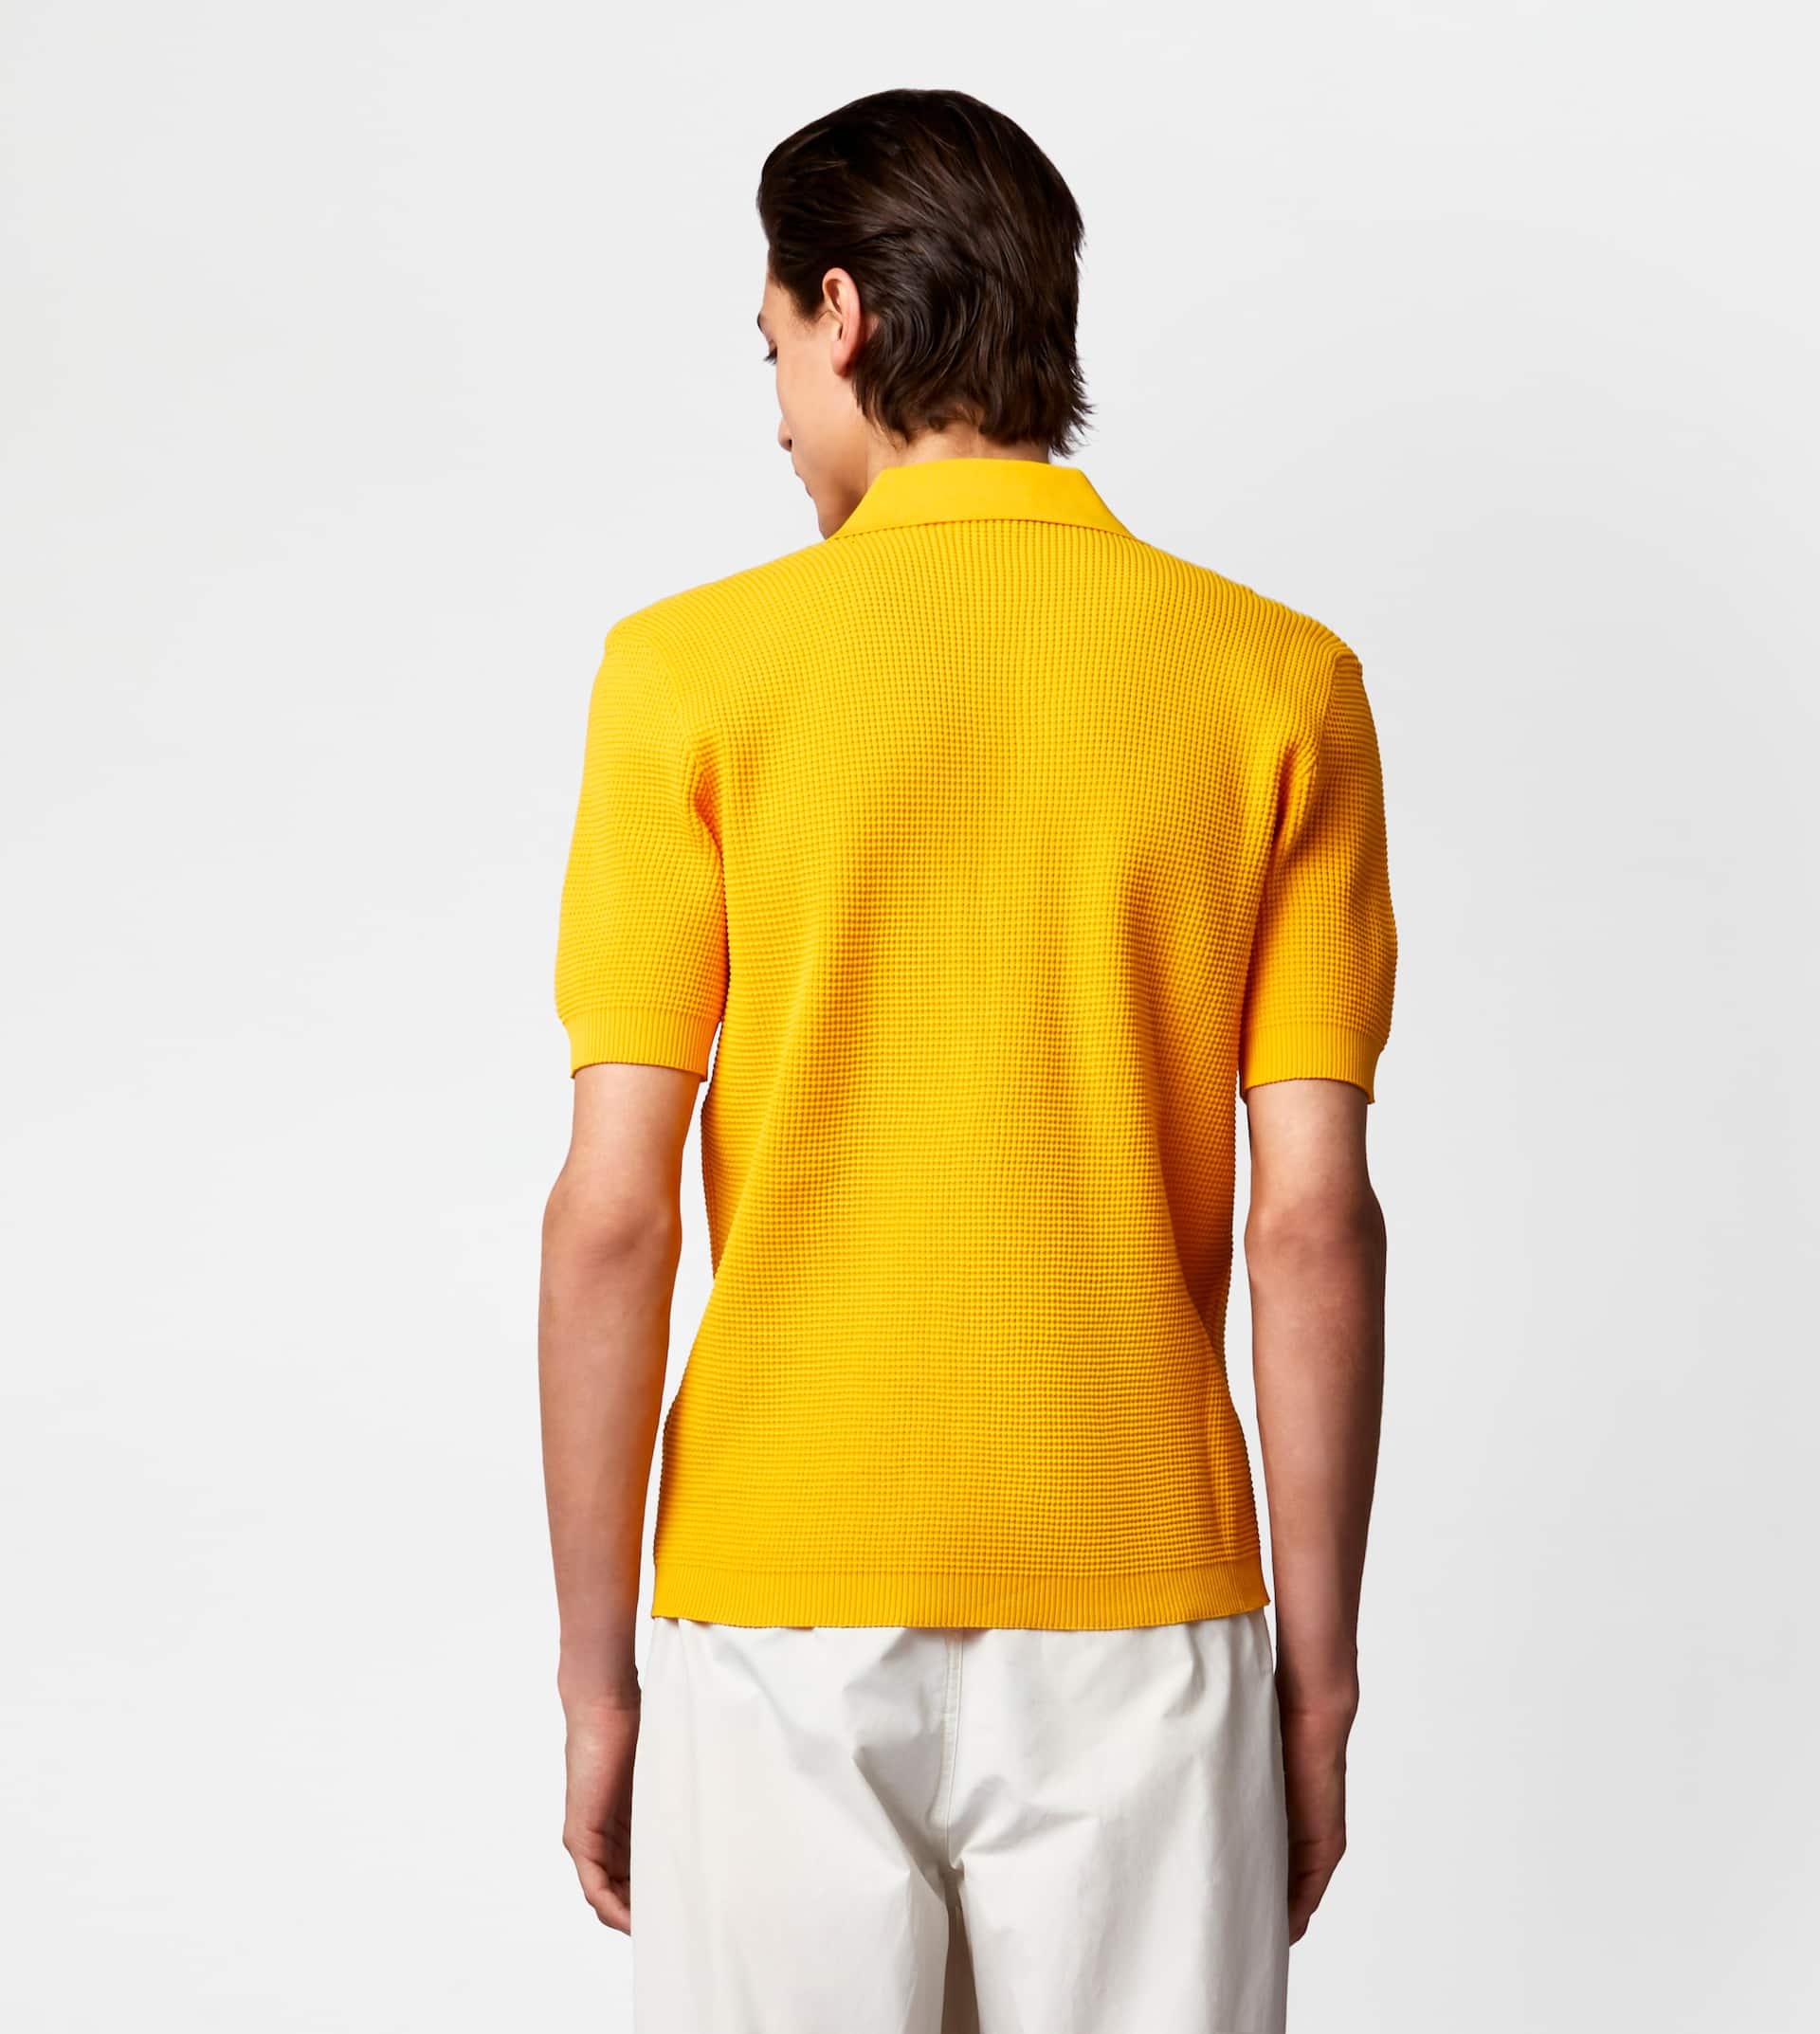 POLO SHIRT IN KNIT - YELLOW - 5